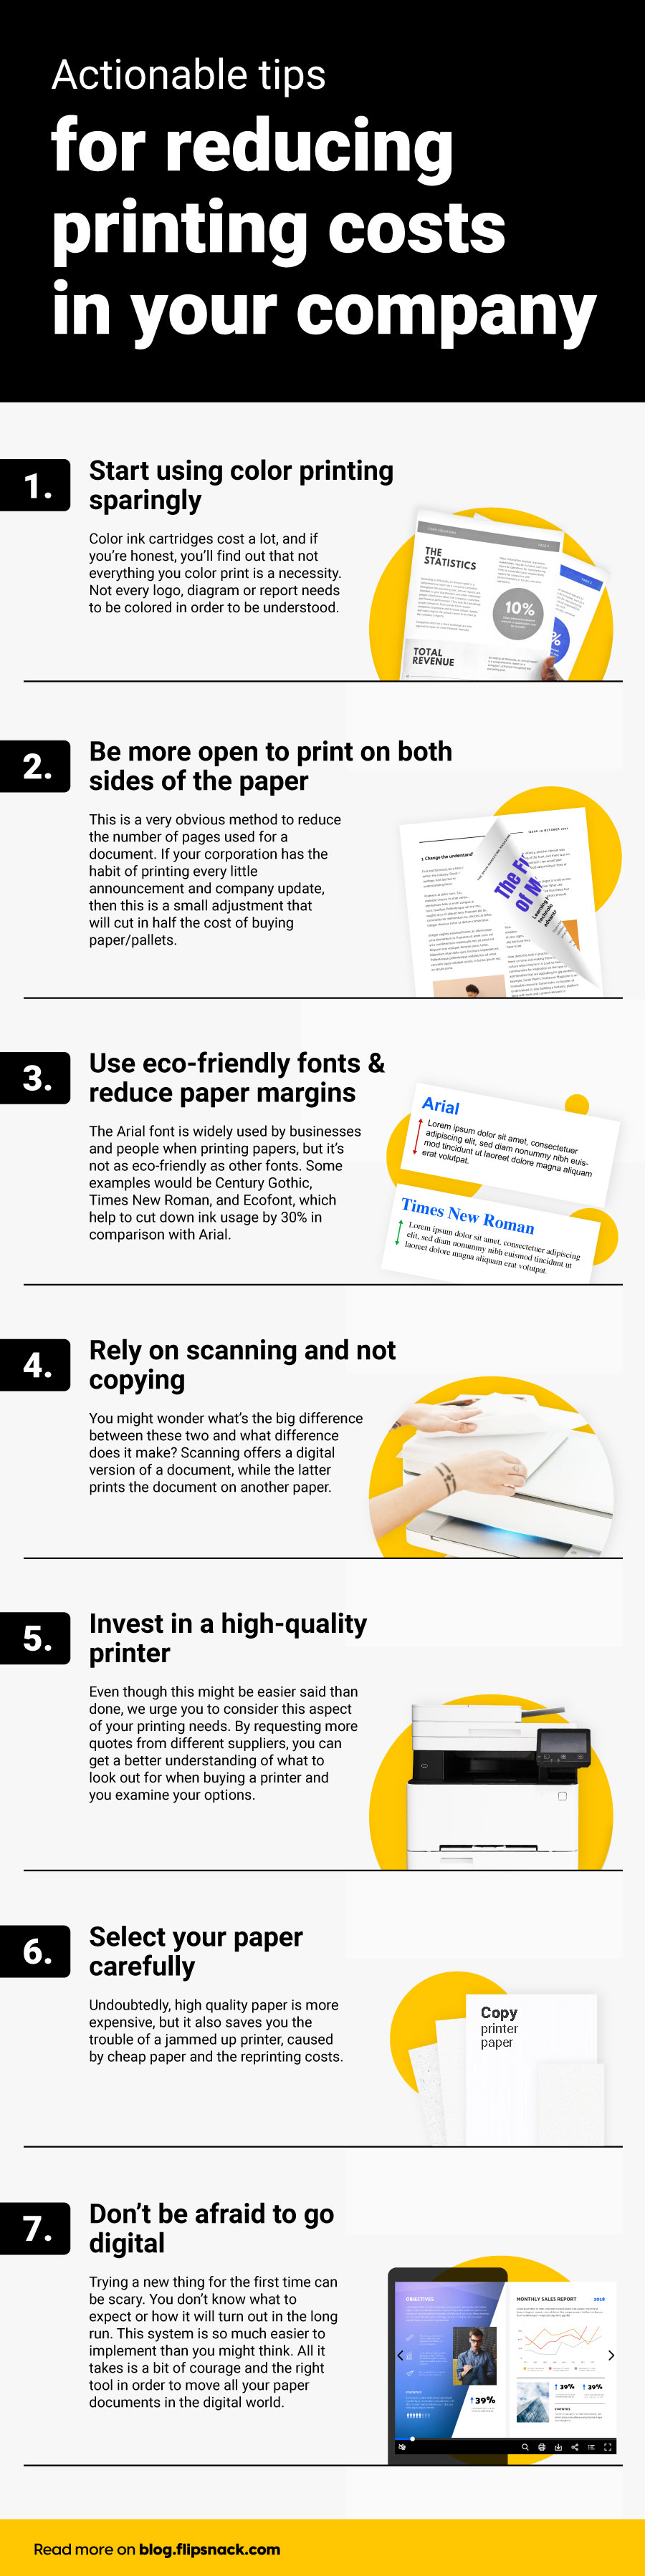 Infographic presenting useful tips for reducing printing costs